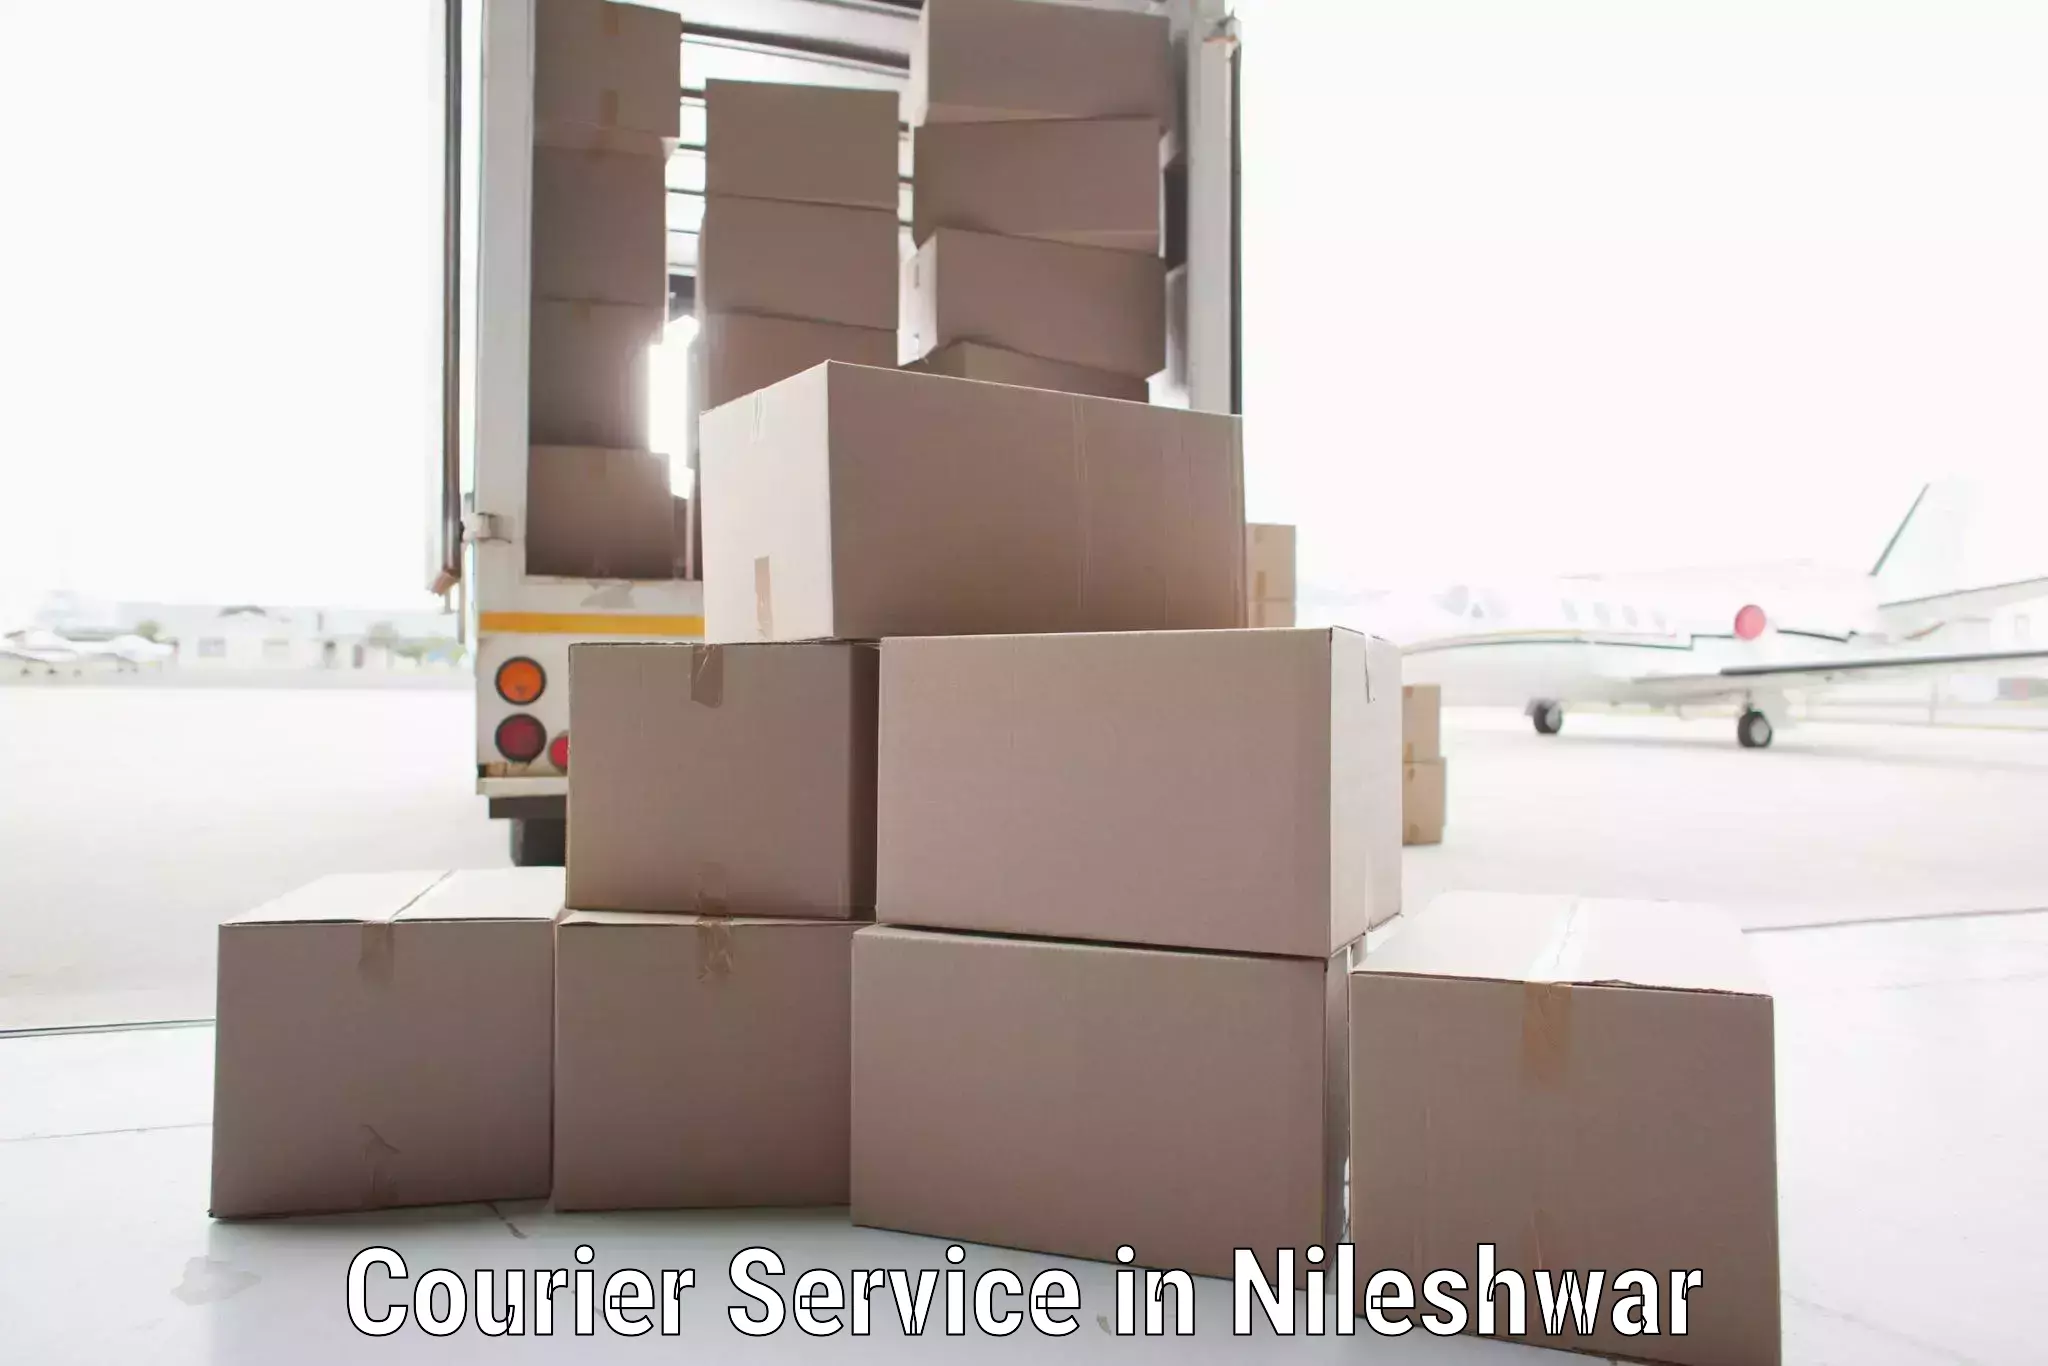 Cargo delivery service in Nileshwar